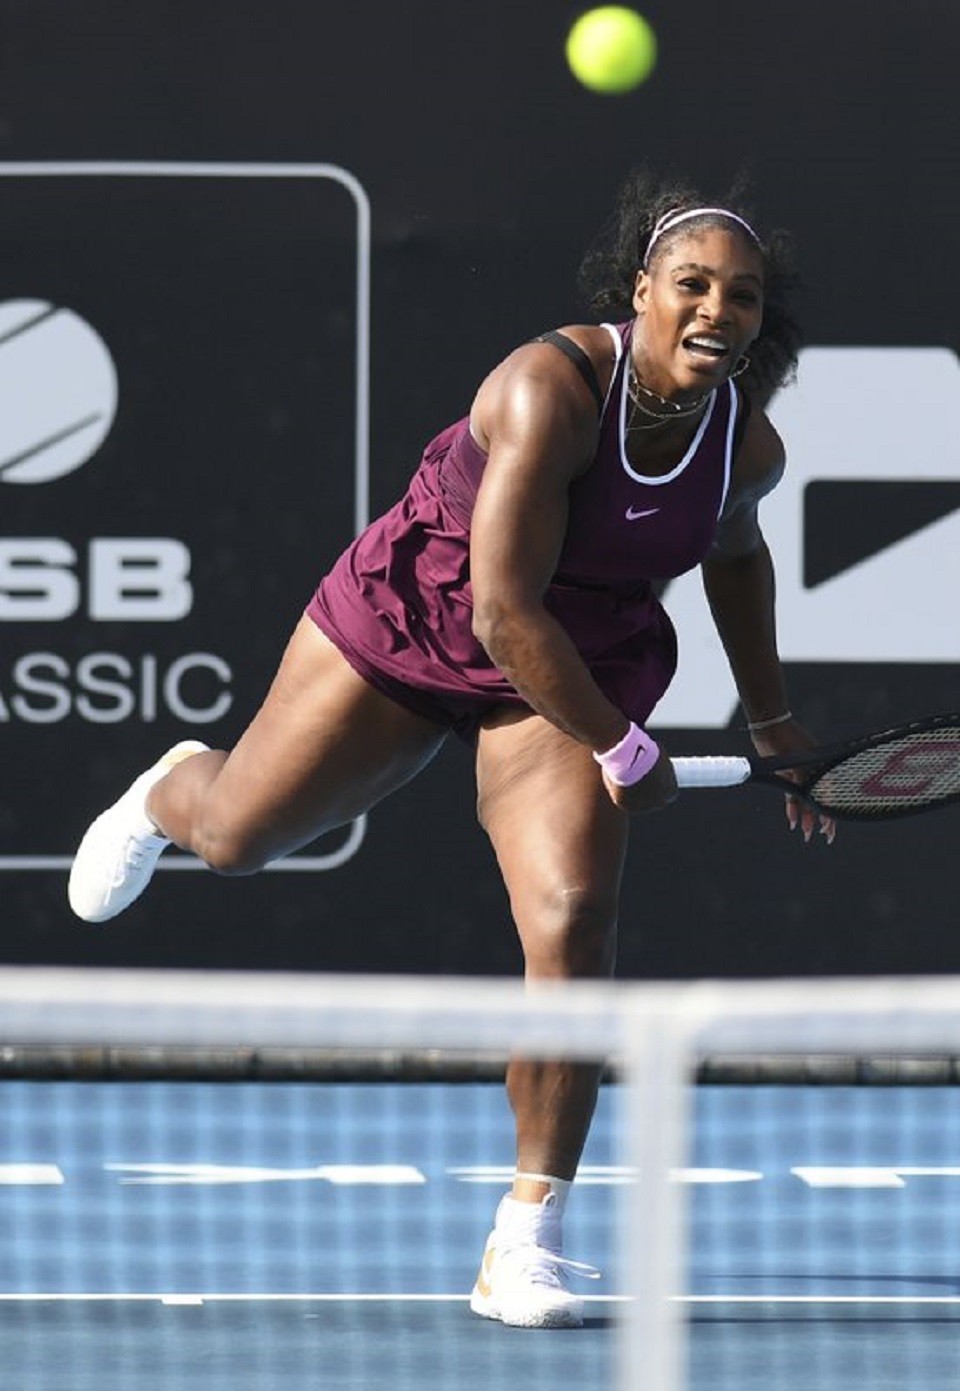 Serena Williams to meet Jessica Pegula in Auckland final